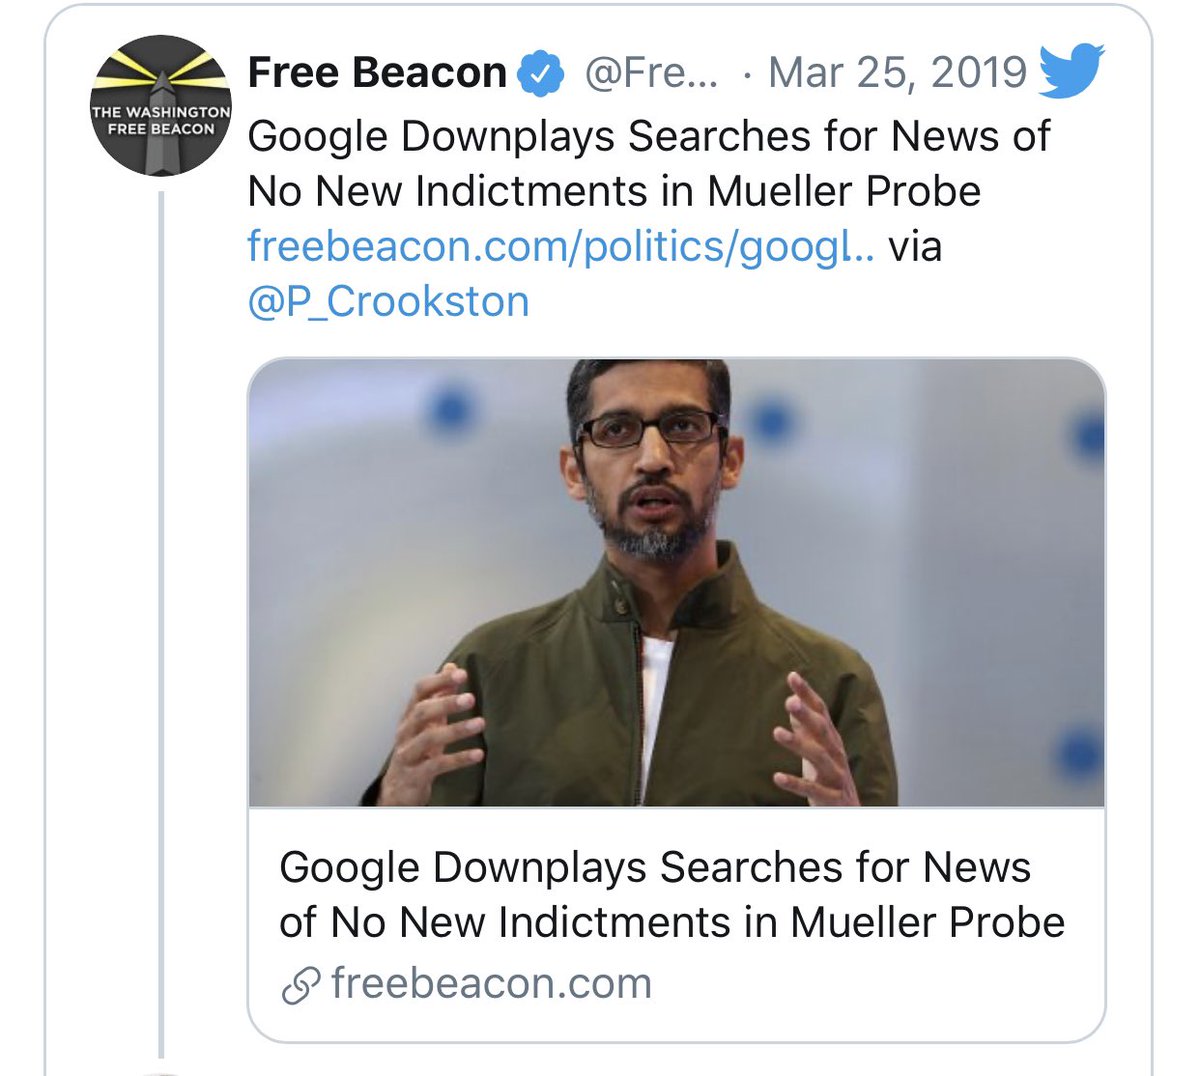 Sometimes the stuff they point to is just absolutely ridiculous. For instance, last year, the right-wing Washington Free Beacon accused Google of trying to hide news related to stories that there were no new indictments in the Mueller probe...